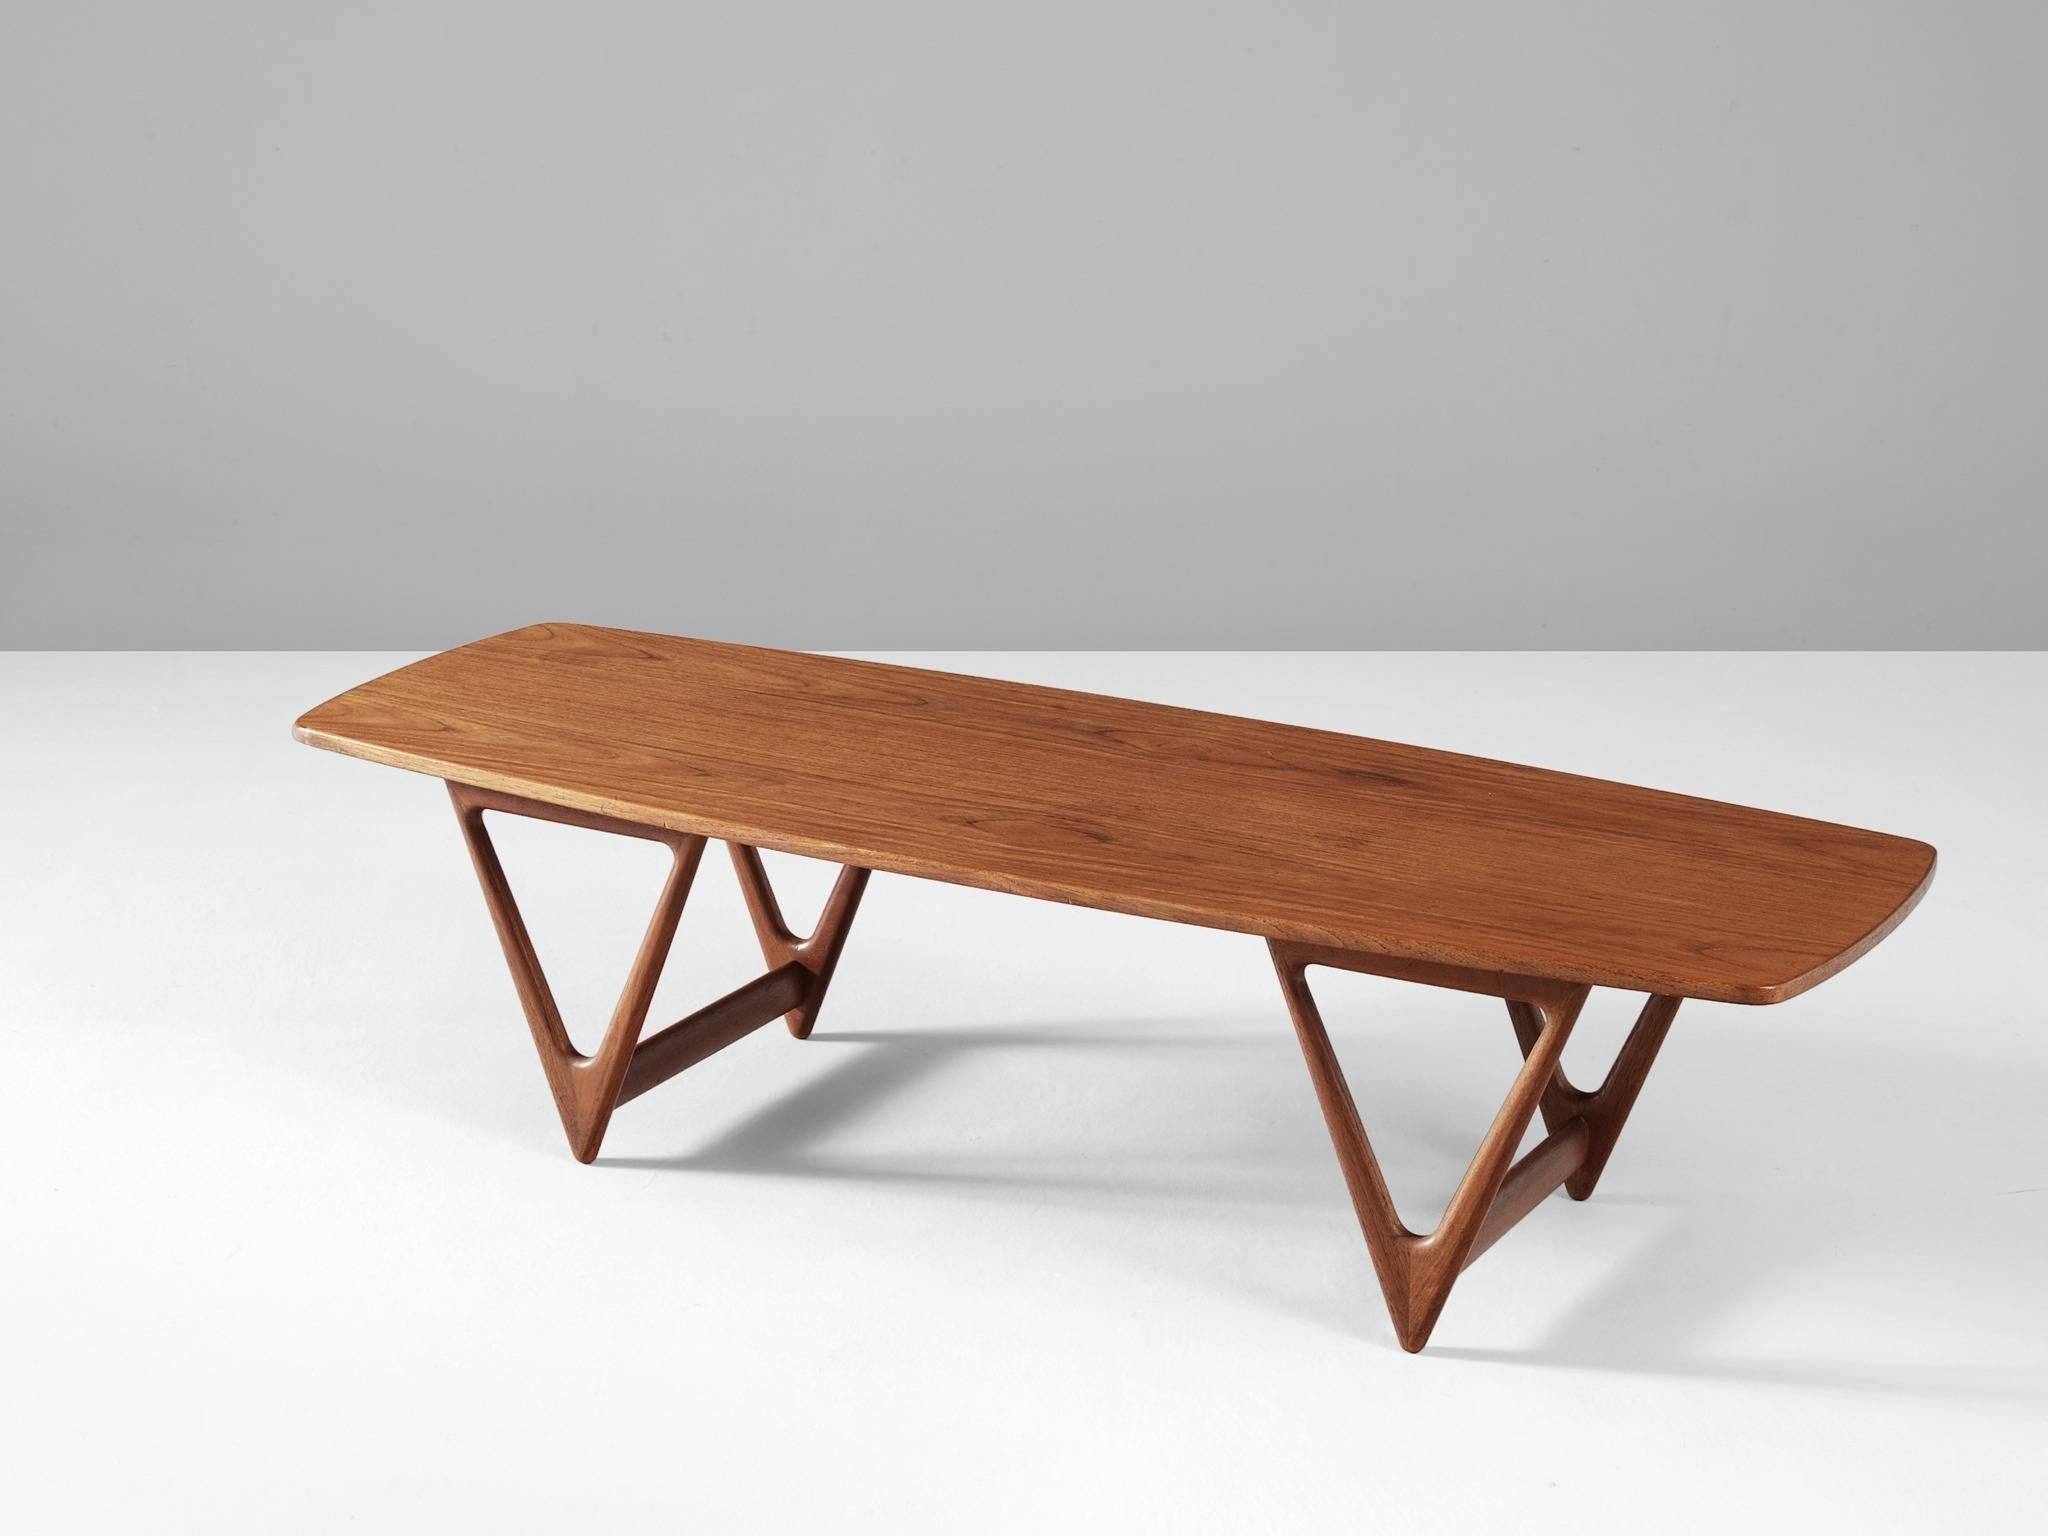 Coffee table, in teak, by Kurt Østervig for Jason Mobler, Denmark 1960s.

Large coffee table in teak. The rectangular top is slightly boat-shaped. The four legs are triangles, with cross-connections. The legs are nicely rounded on the edges. This